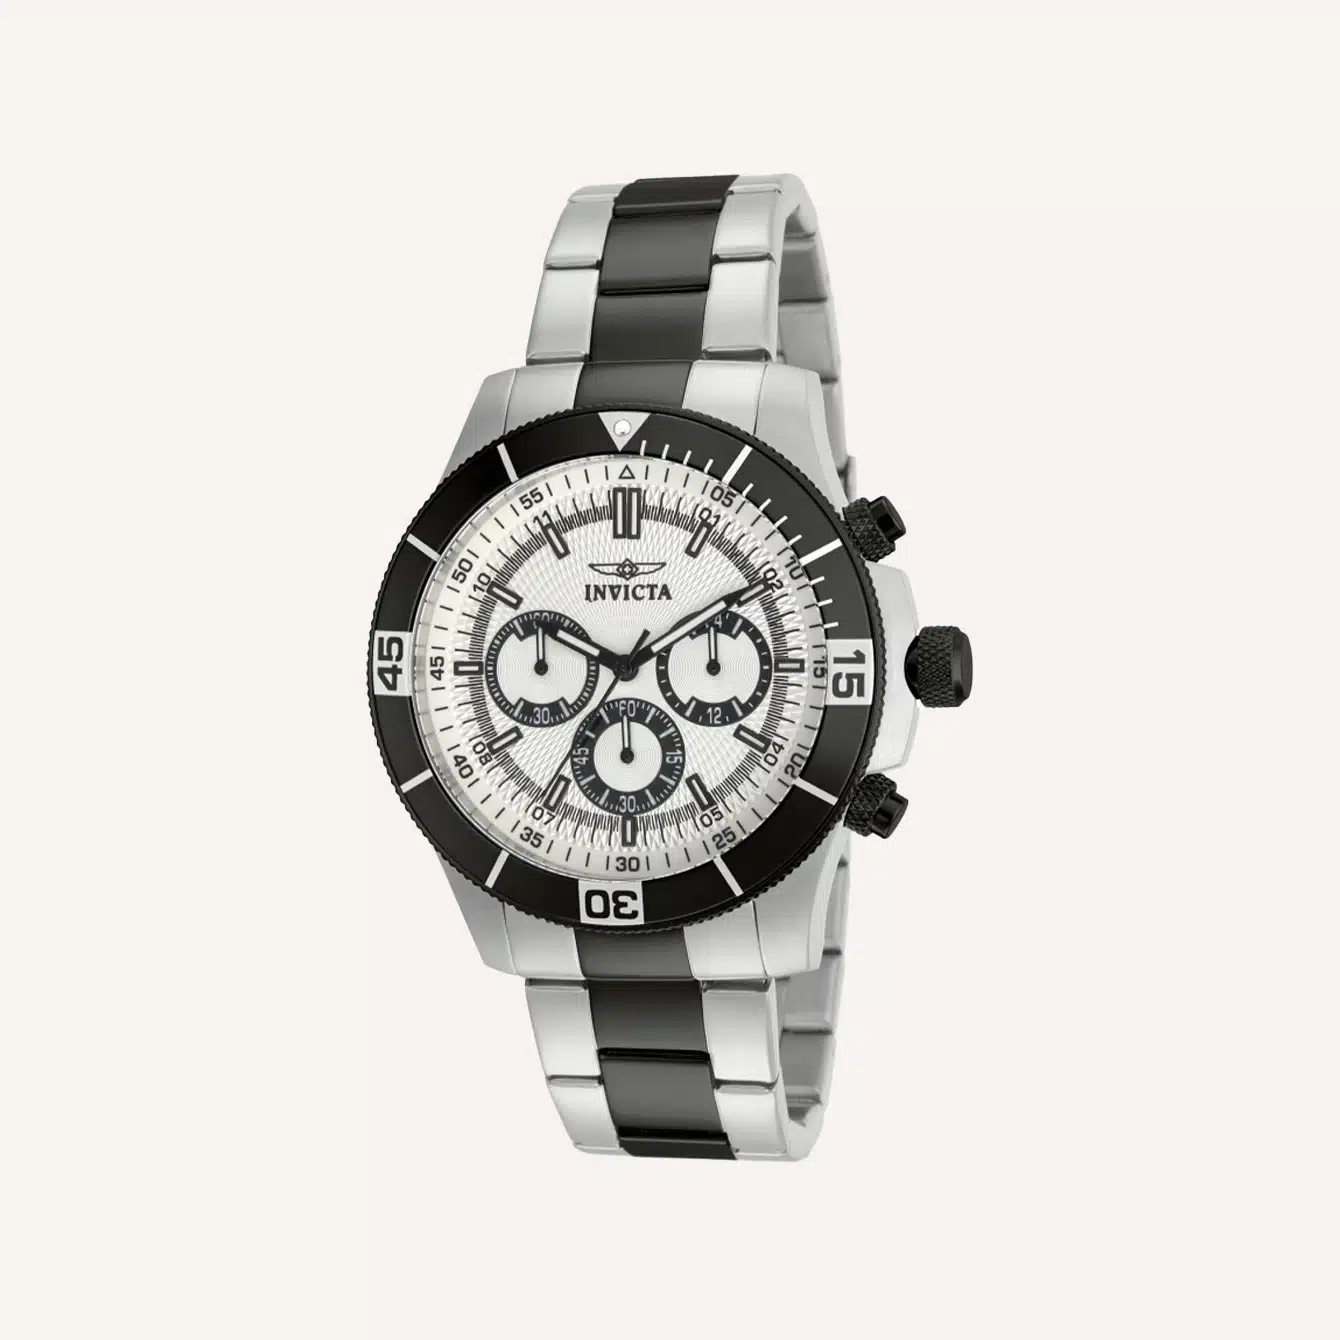 12 Best Invicta Watches (Invicta Watch Buying Guide)-9